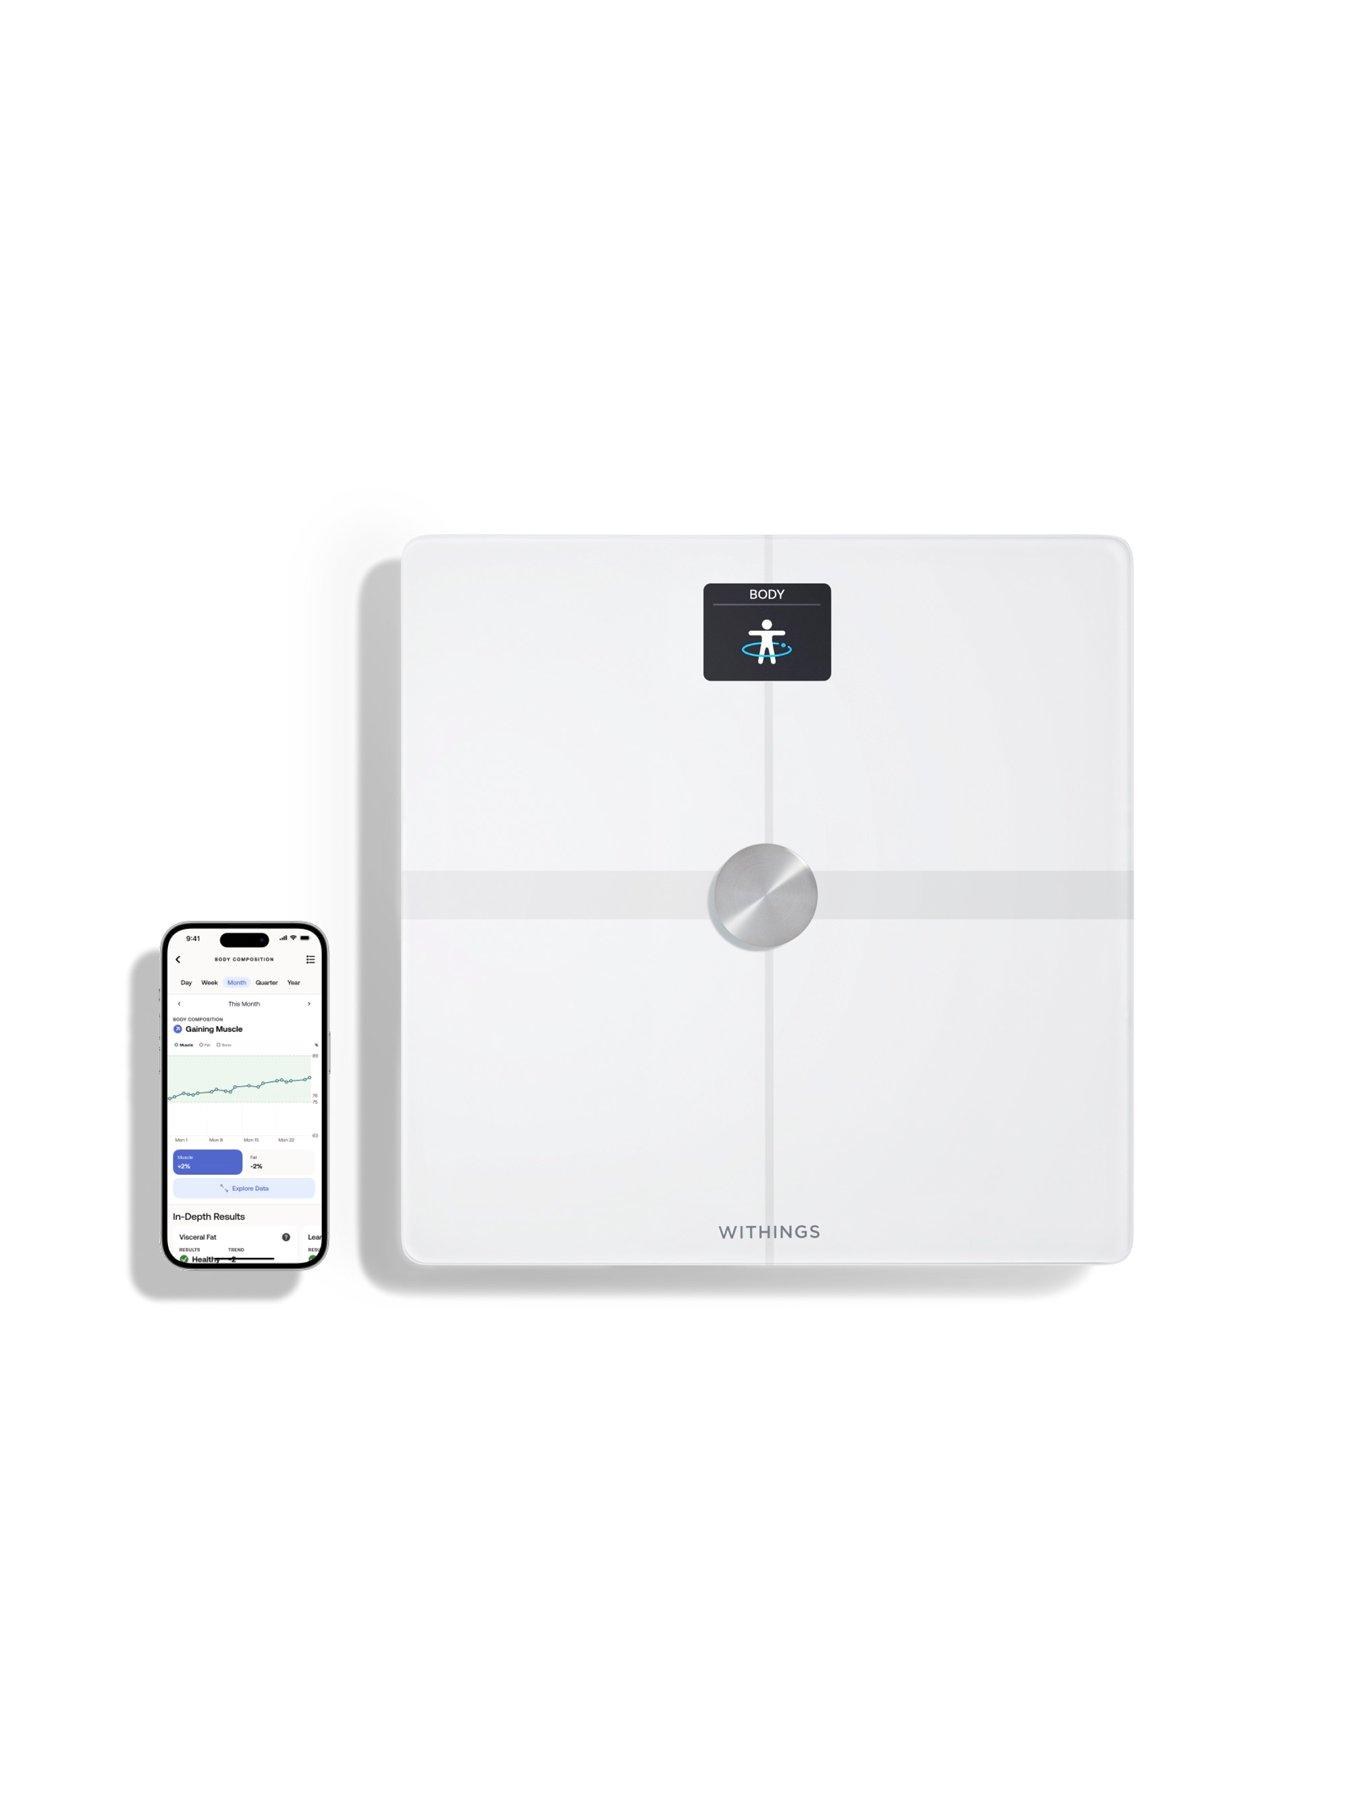 Withings Body Cardio scale review - The Gadgeteer